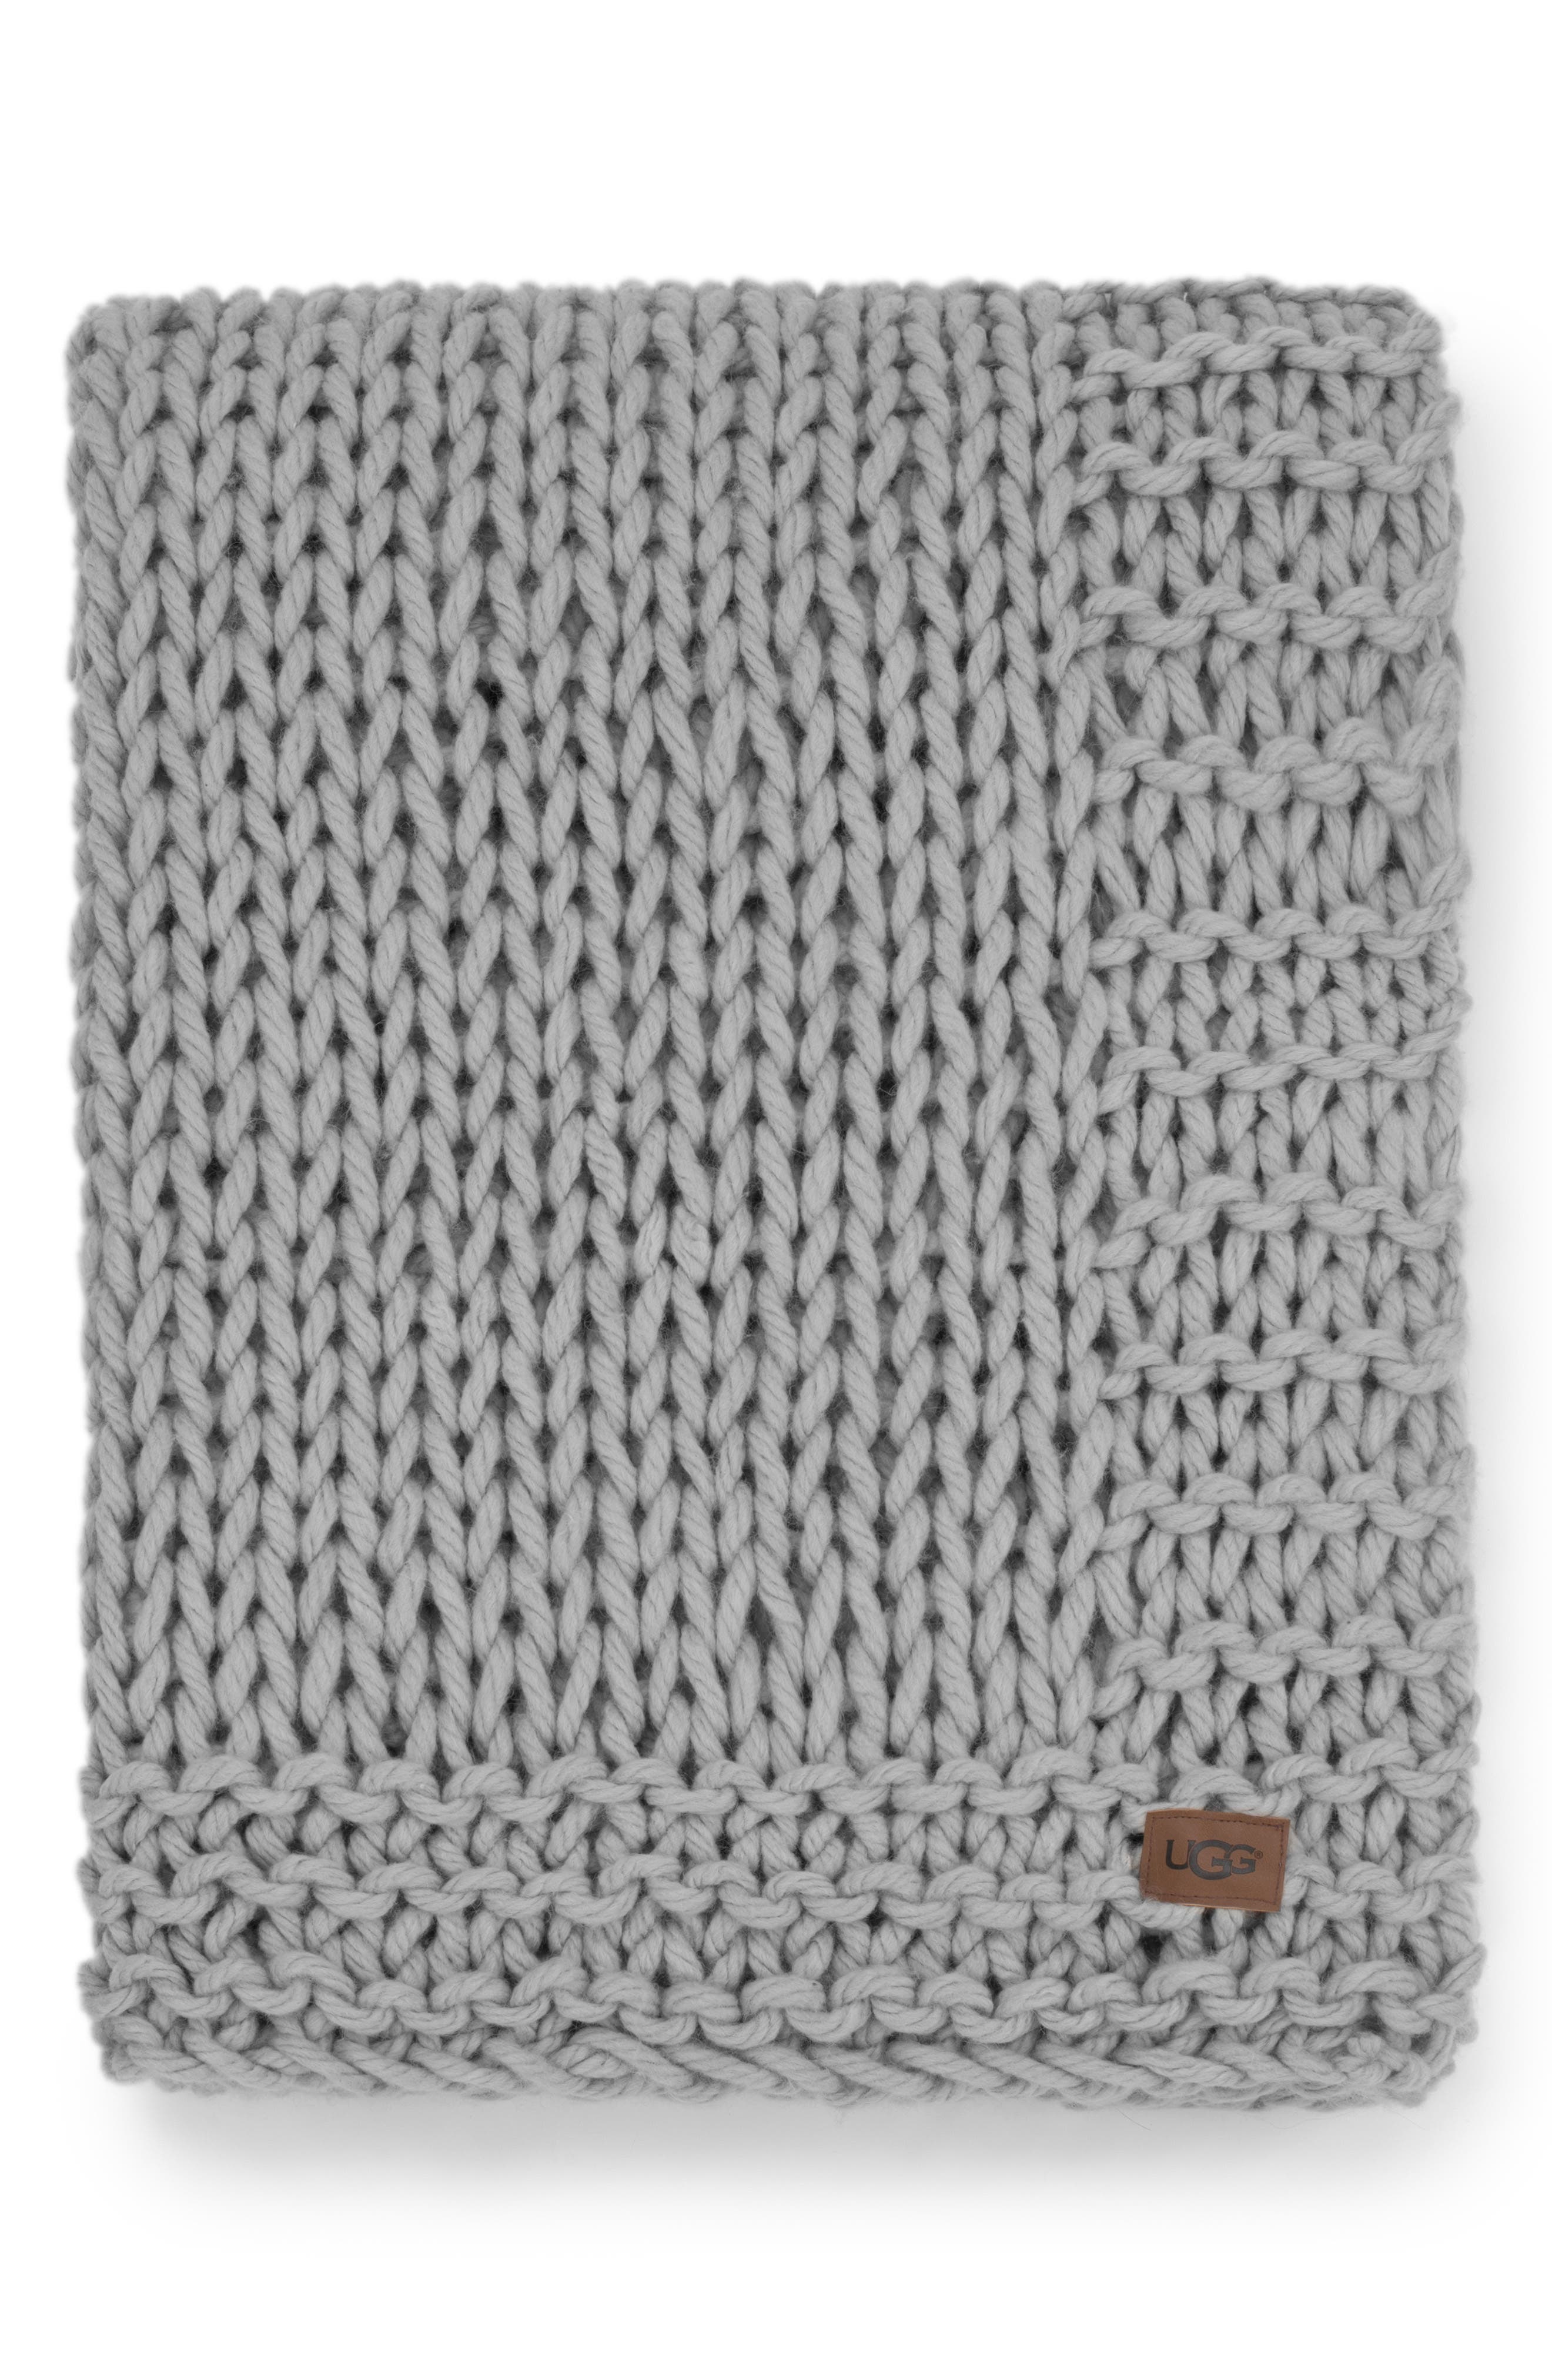 UGG® Wharf Knit Throw Blanket | Nordstrom